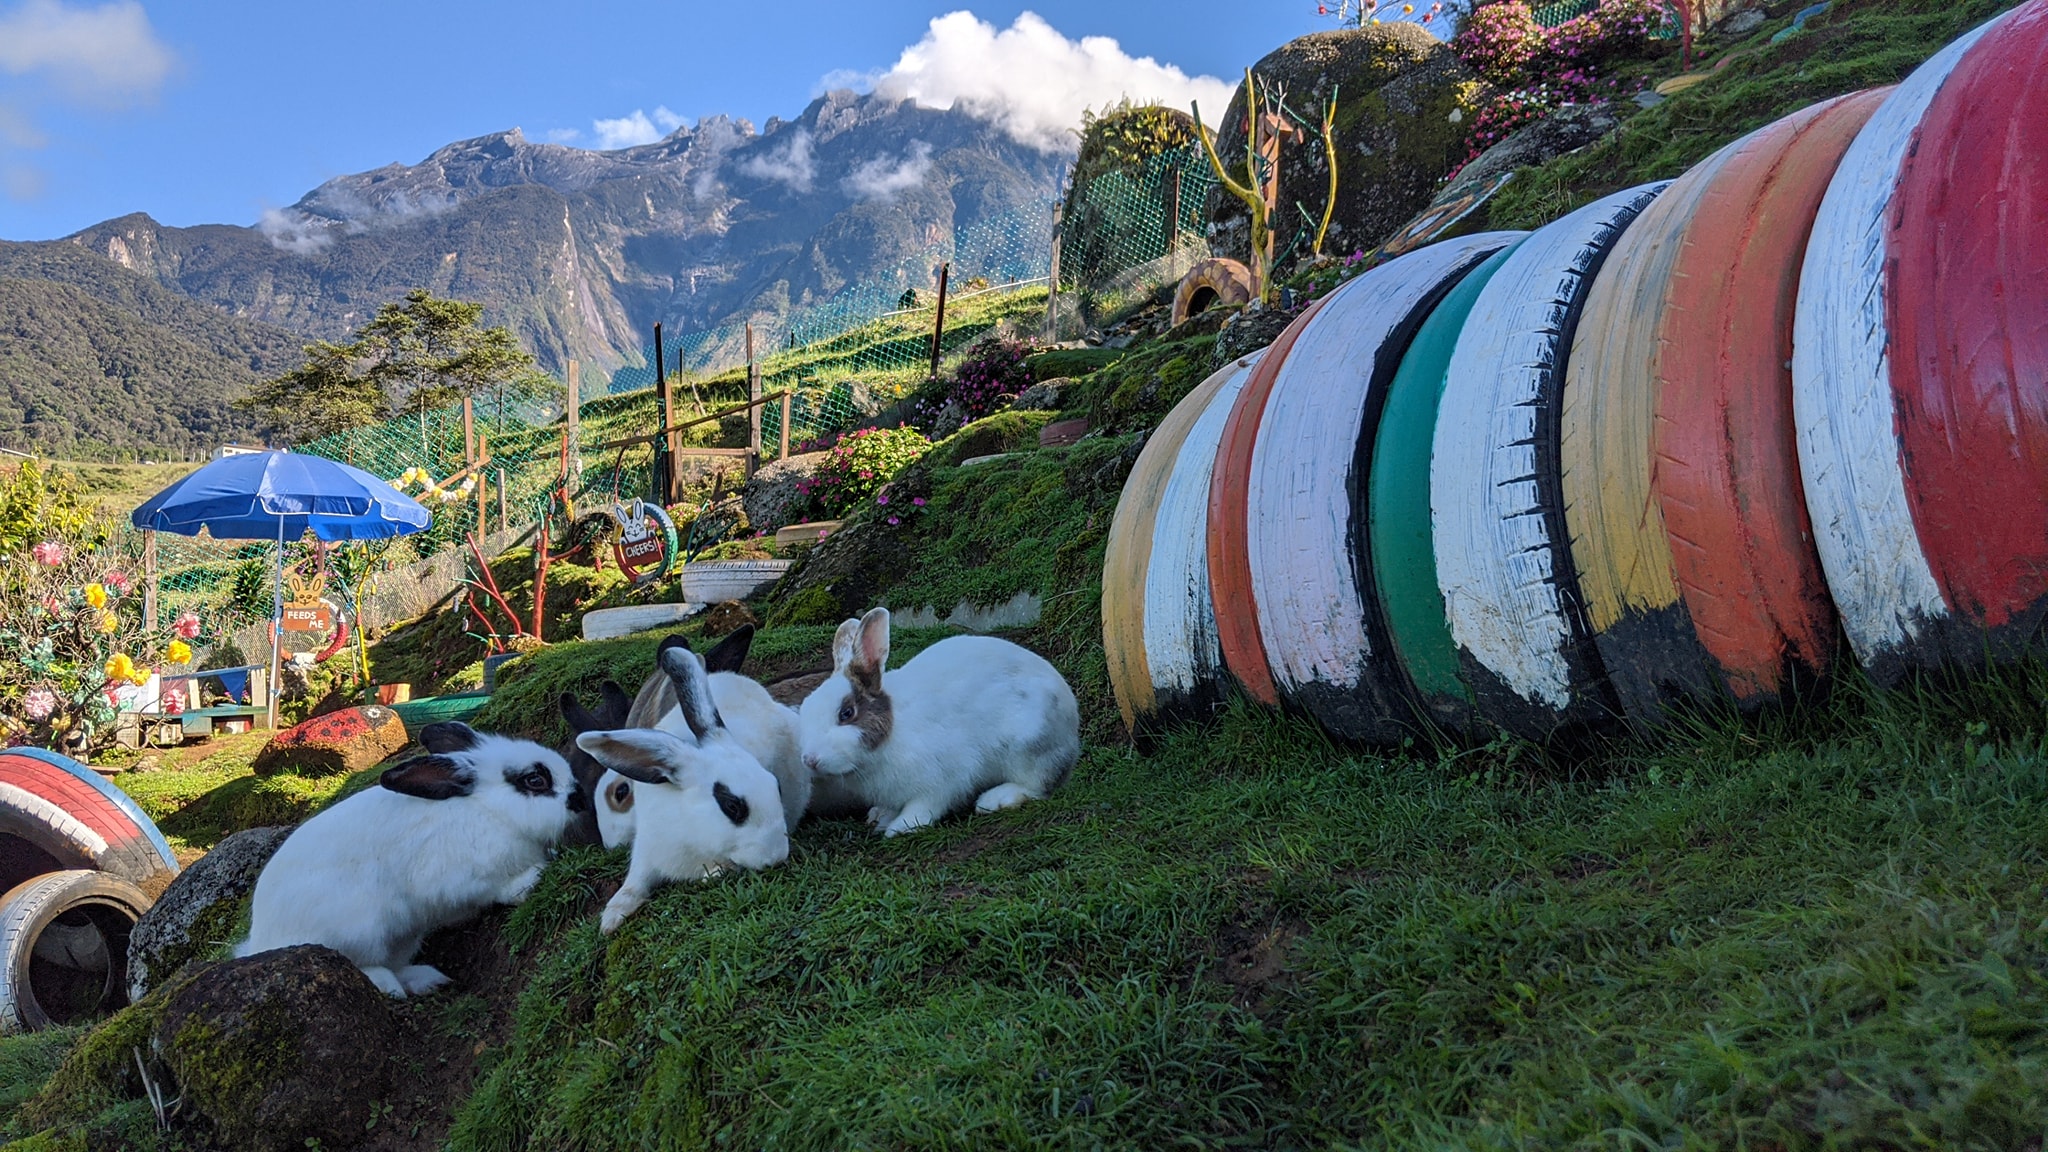 Rabbit Garden In M'sia Is As High As Genting Highlands, Can Pet Bunnies